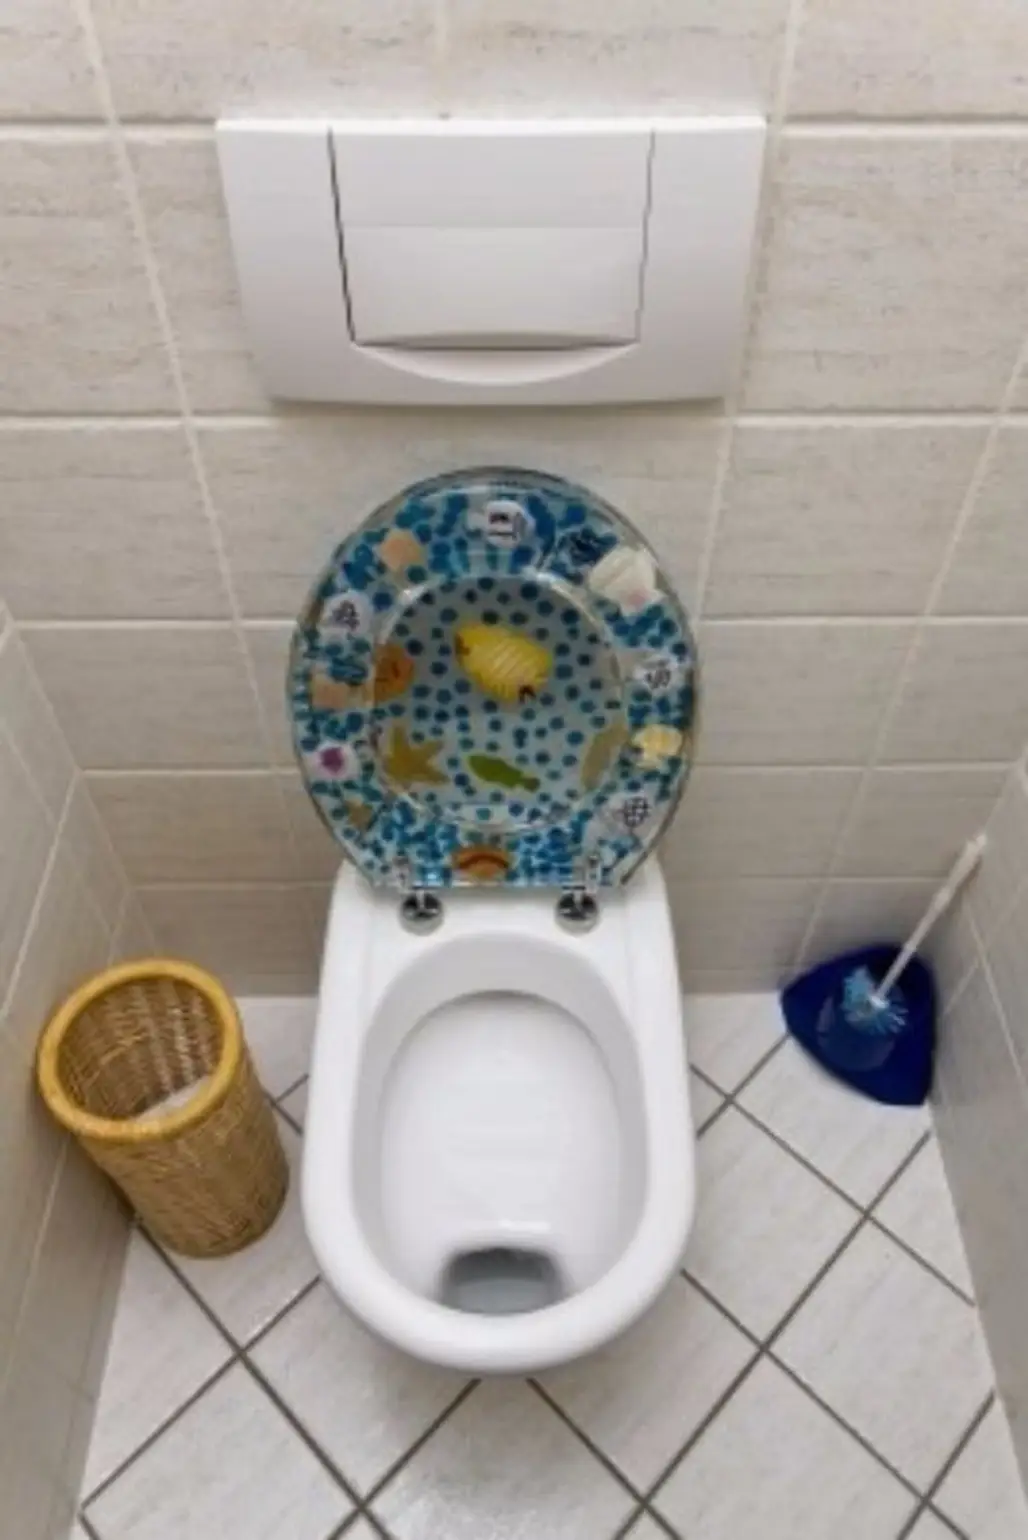 And if You Feel so Inclined - Lift the Toilet Seat 3740 Times!